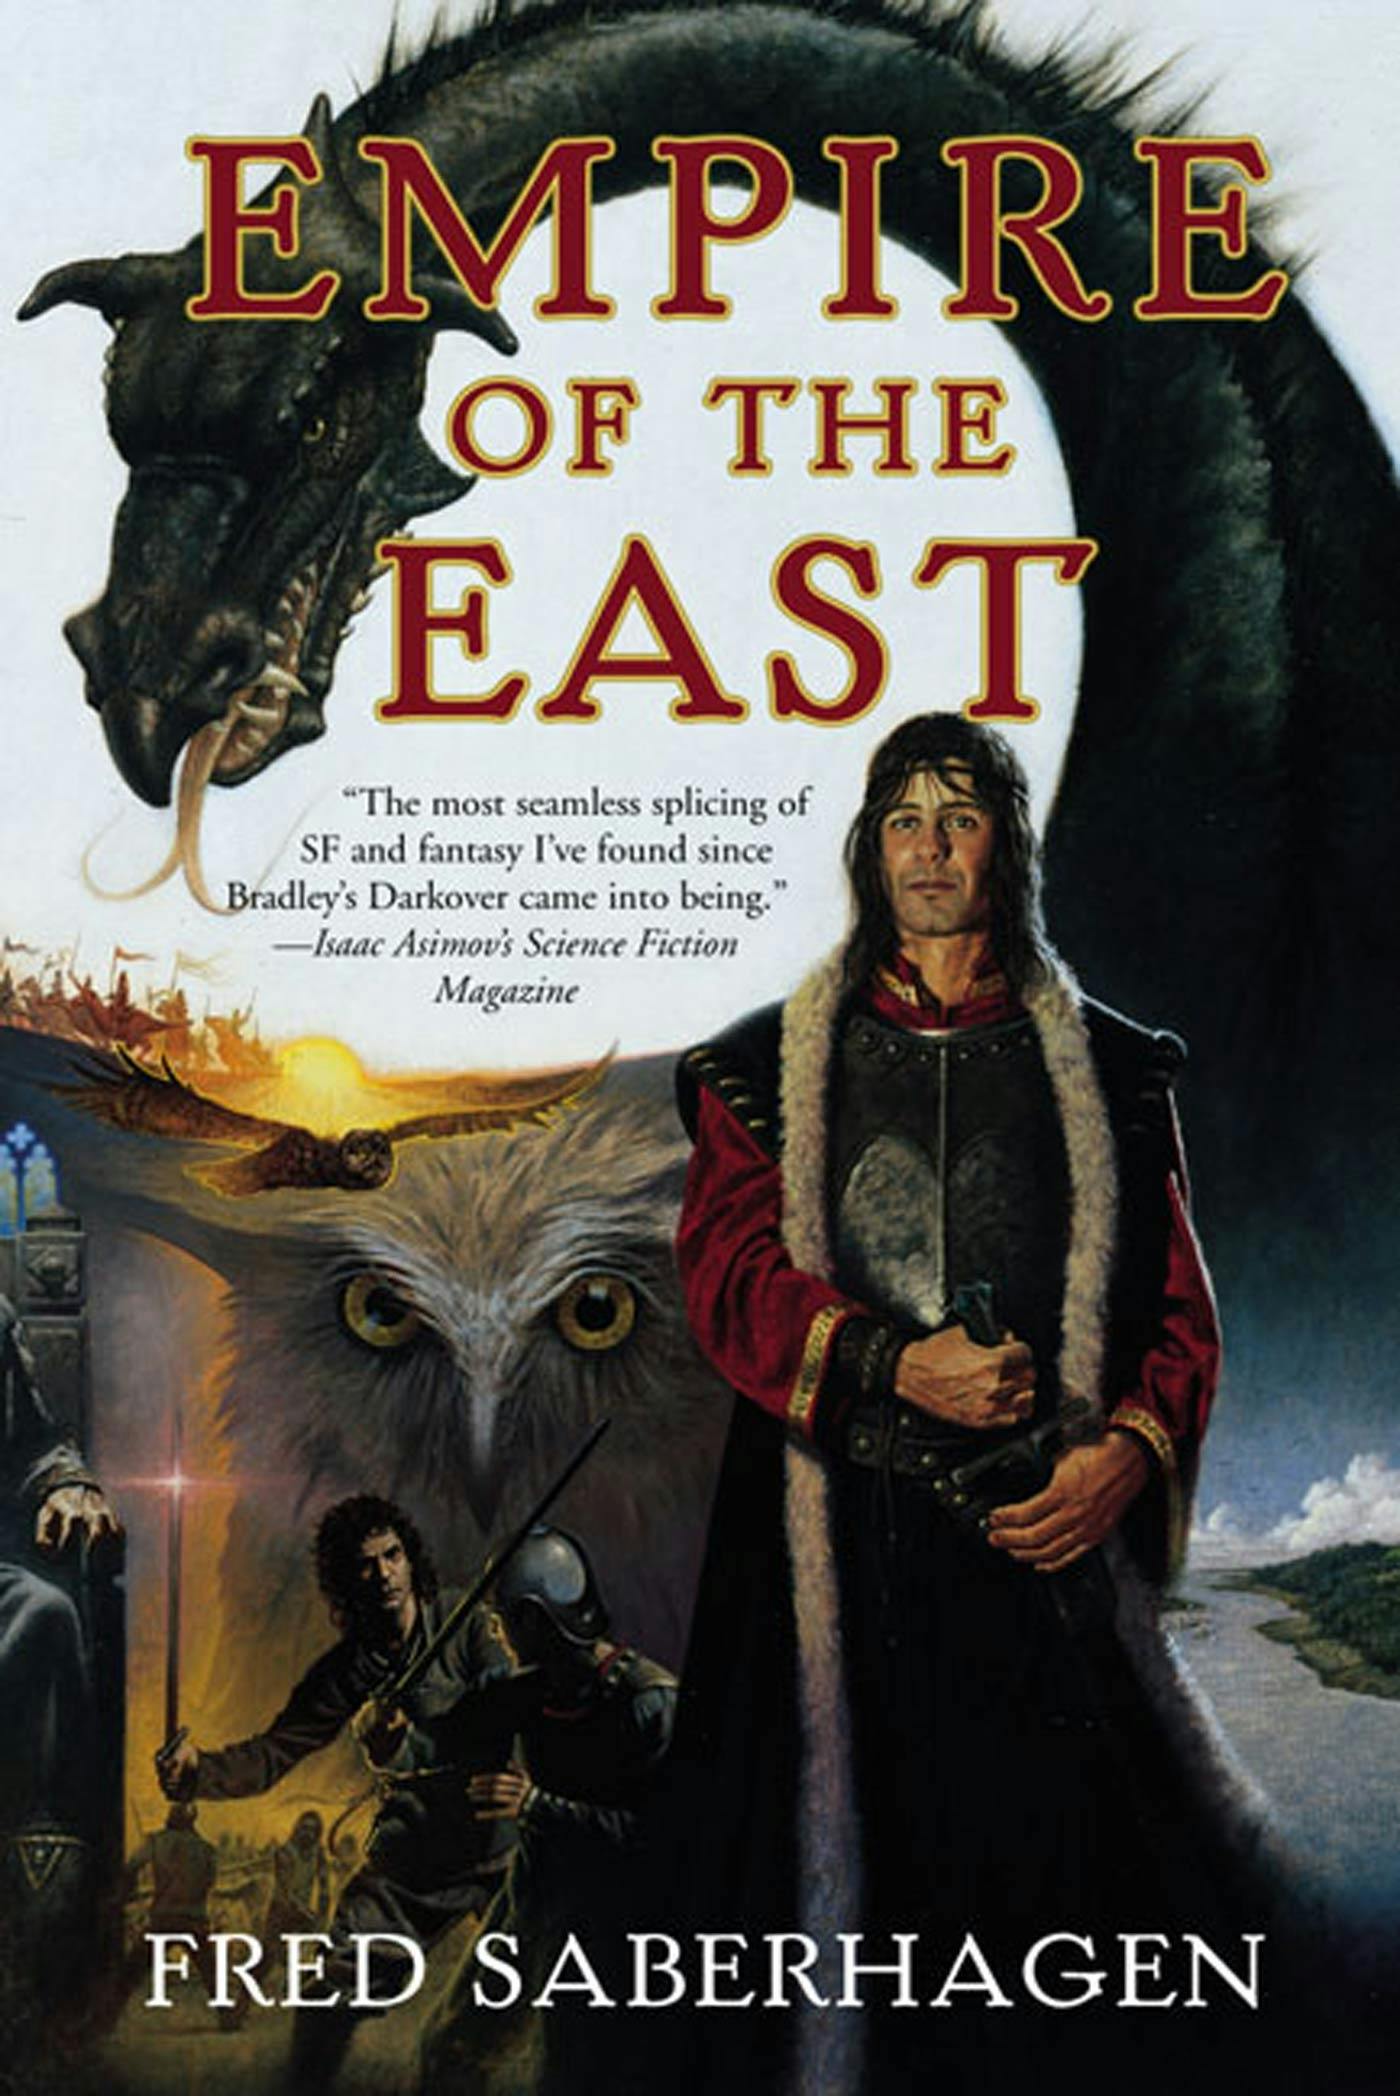 Cover for the book titled as: Empire of the East